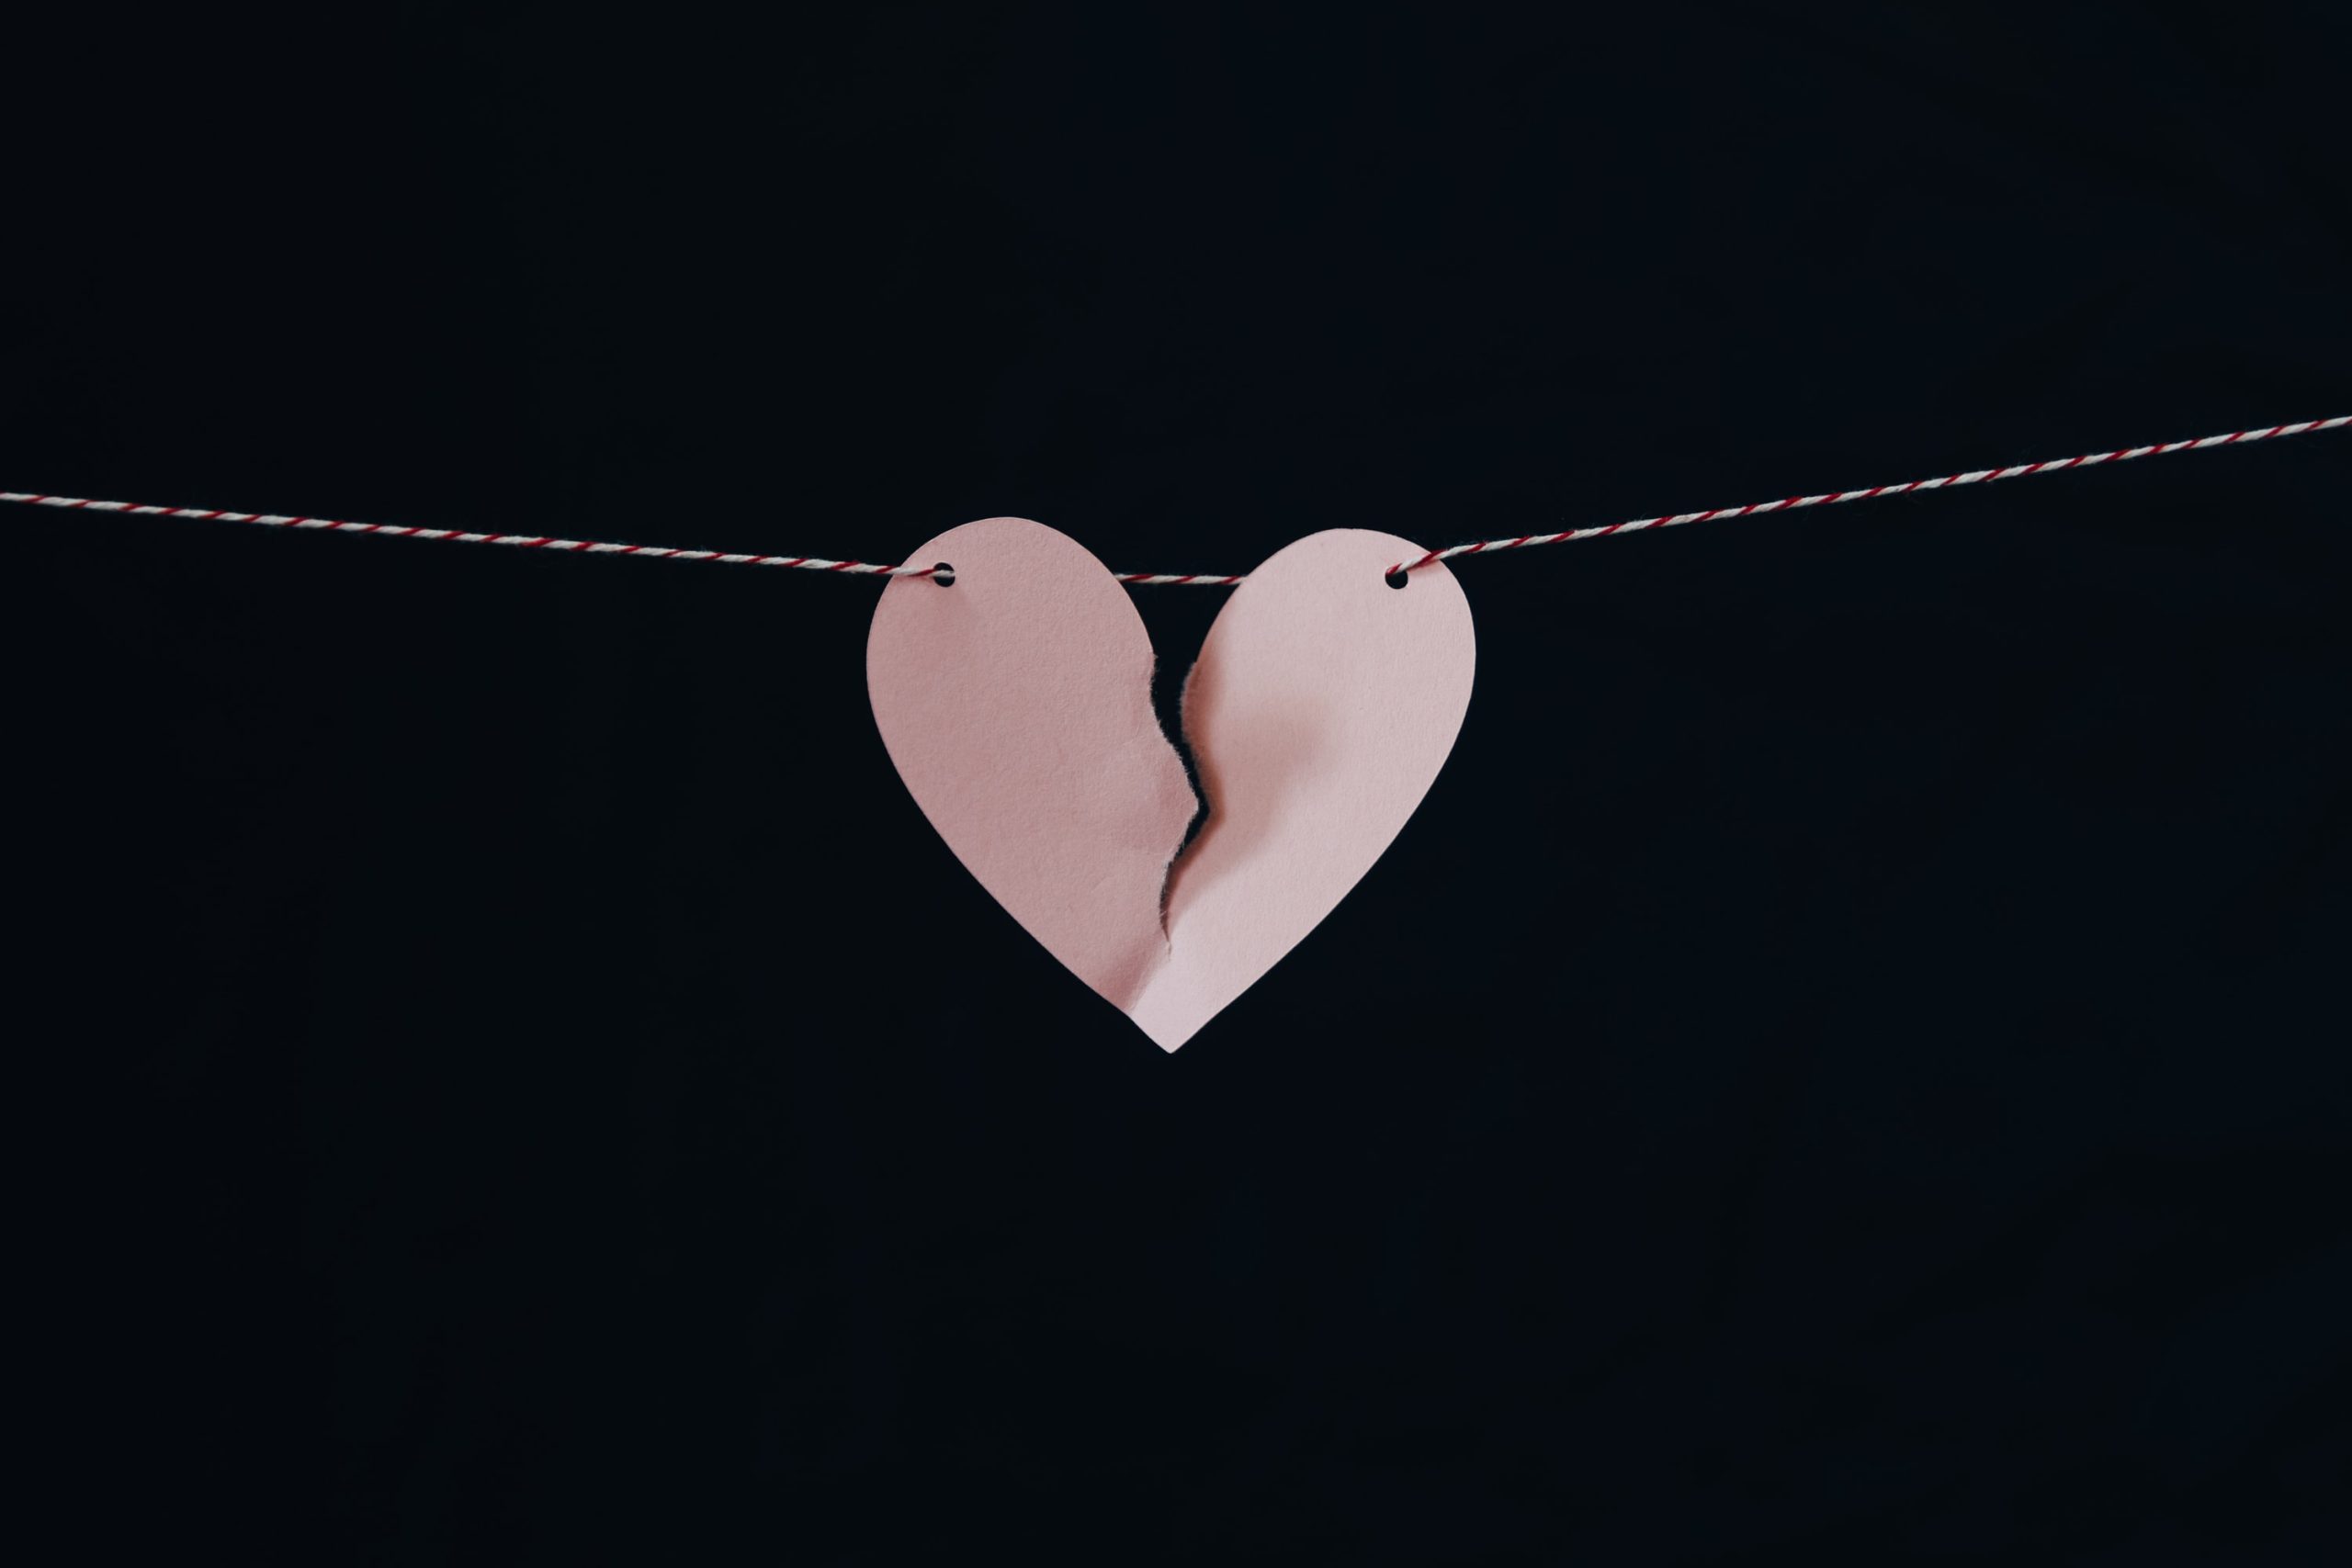 A paper heart on a string starts to rip.